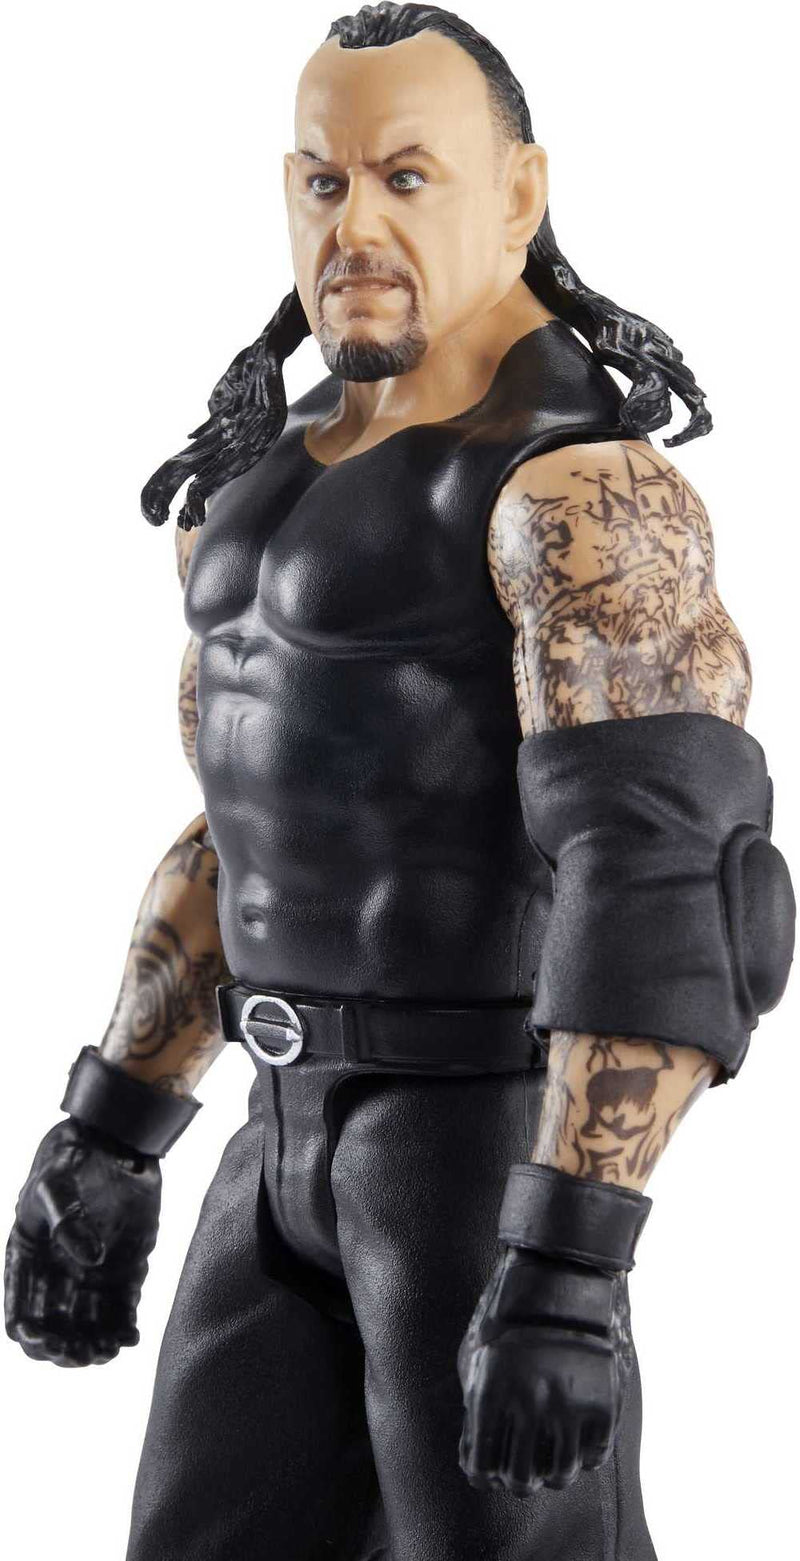 WWE Undertaker Top Picks Action Figures, 6-inch Posable Collectible